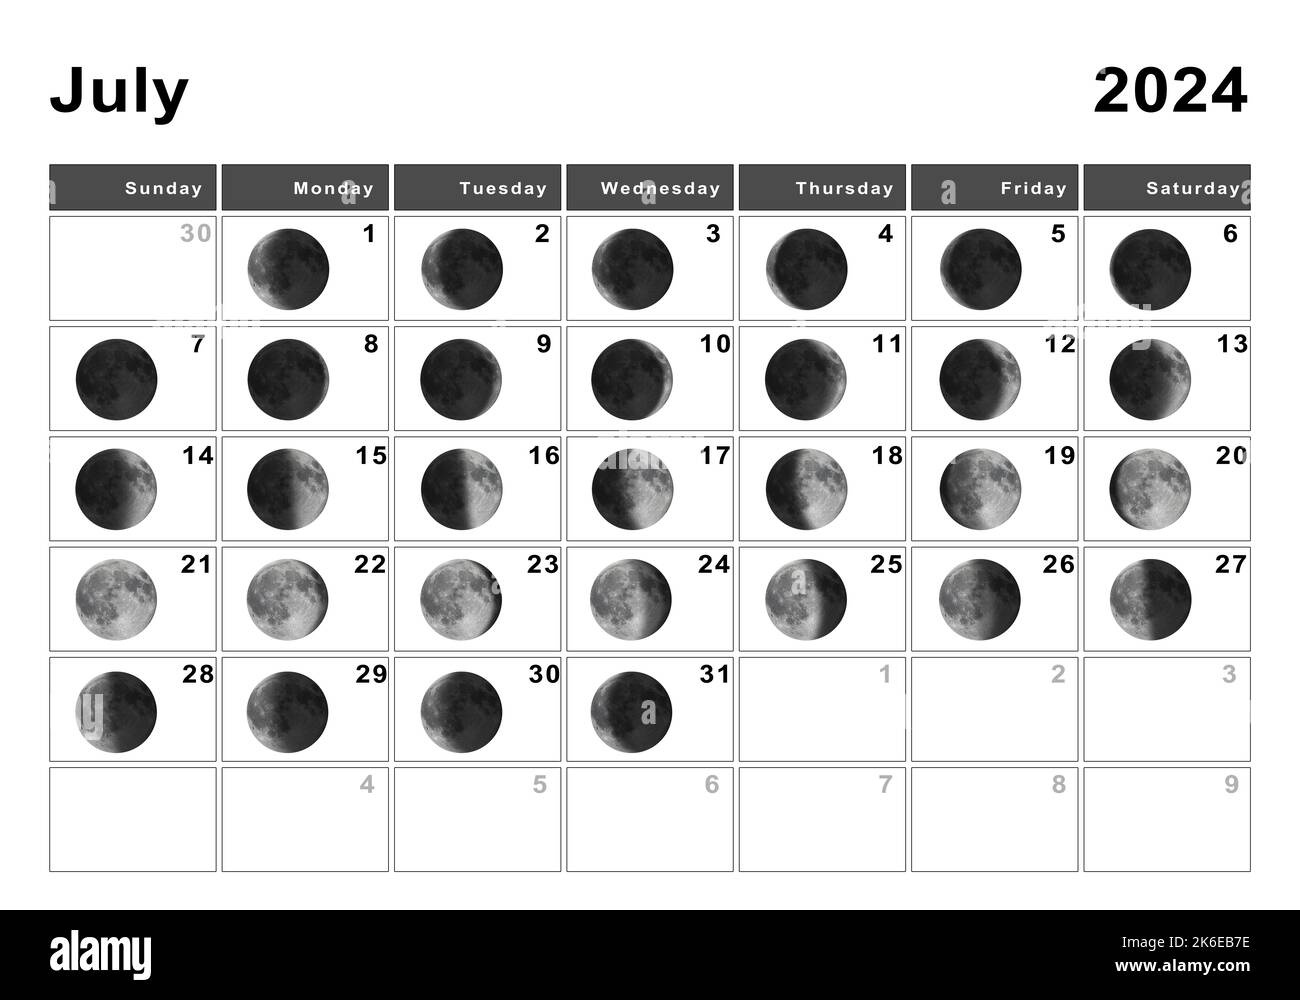 July 2024 Lunar Calendar, Moon Cycles, Moon Phases Stock Photo - Alamy pertaining to July 11th Lunar Calendar 2024